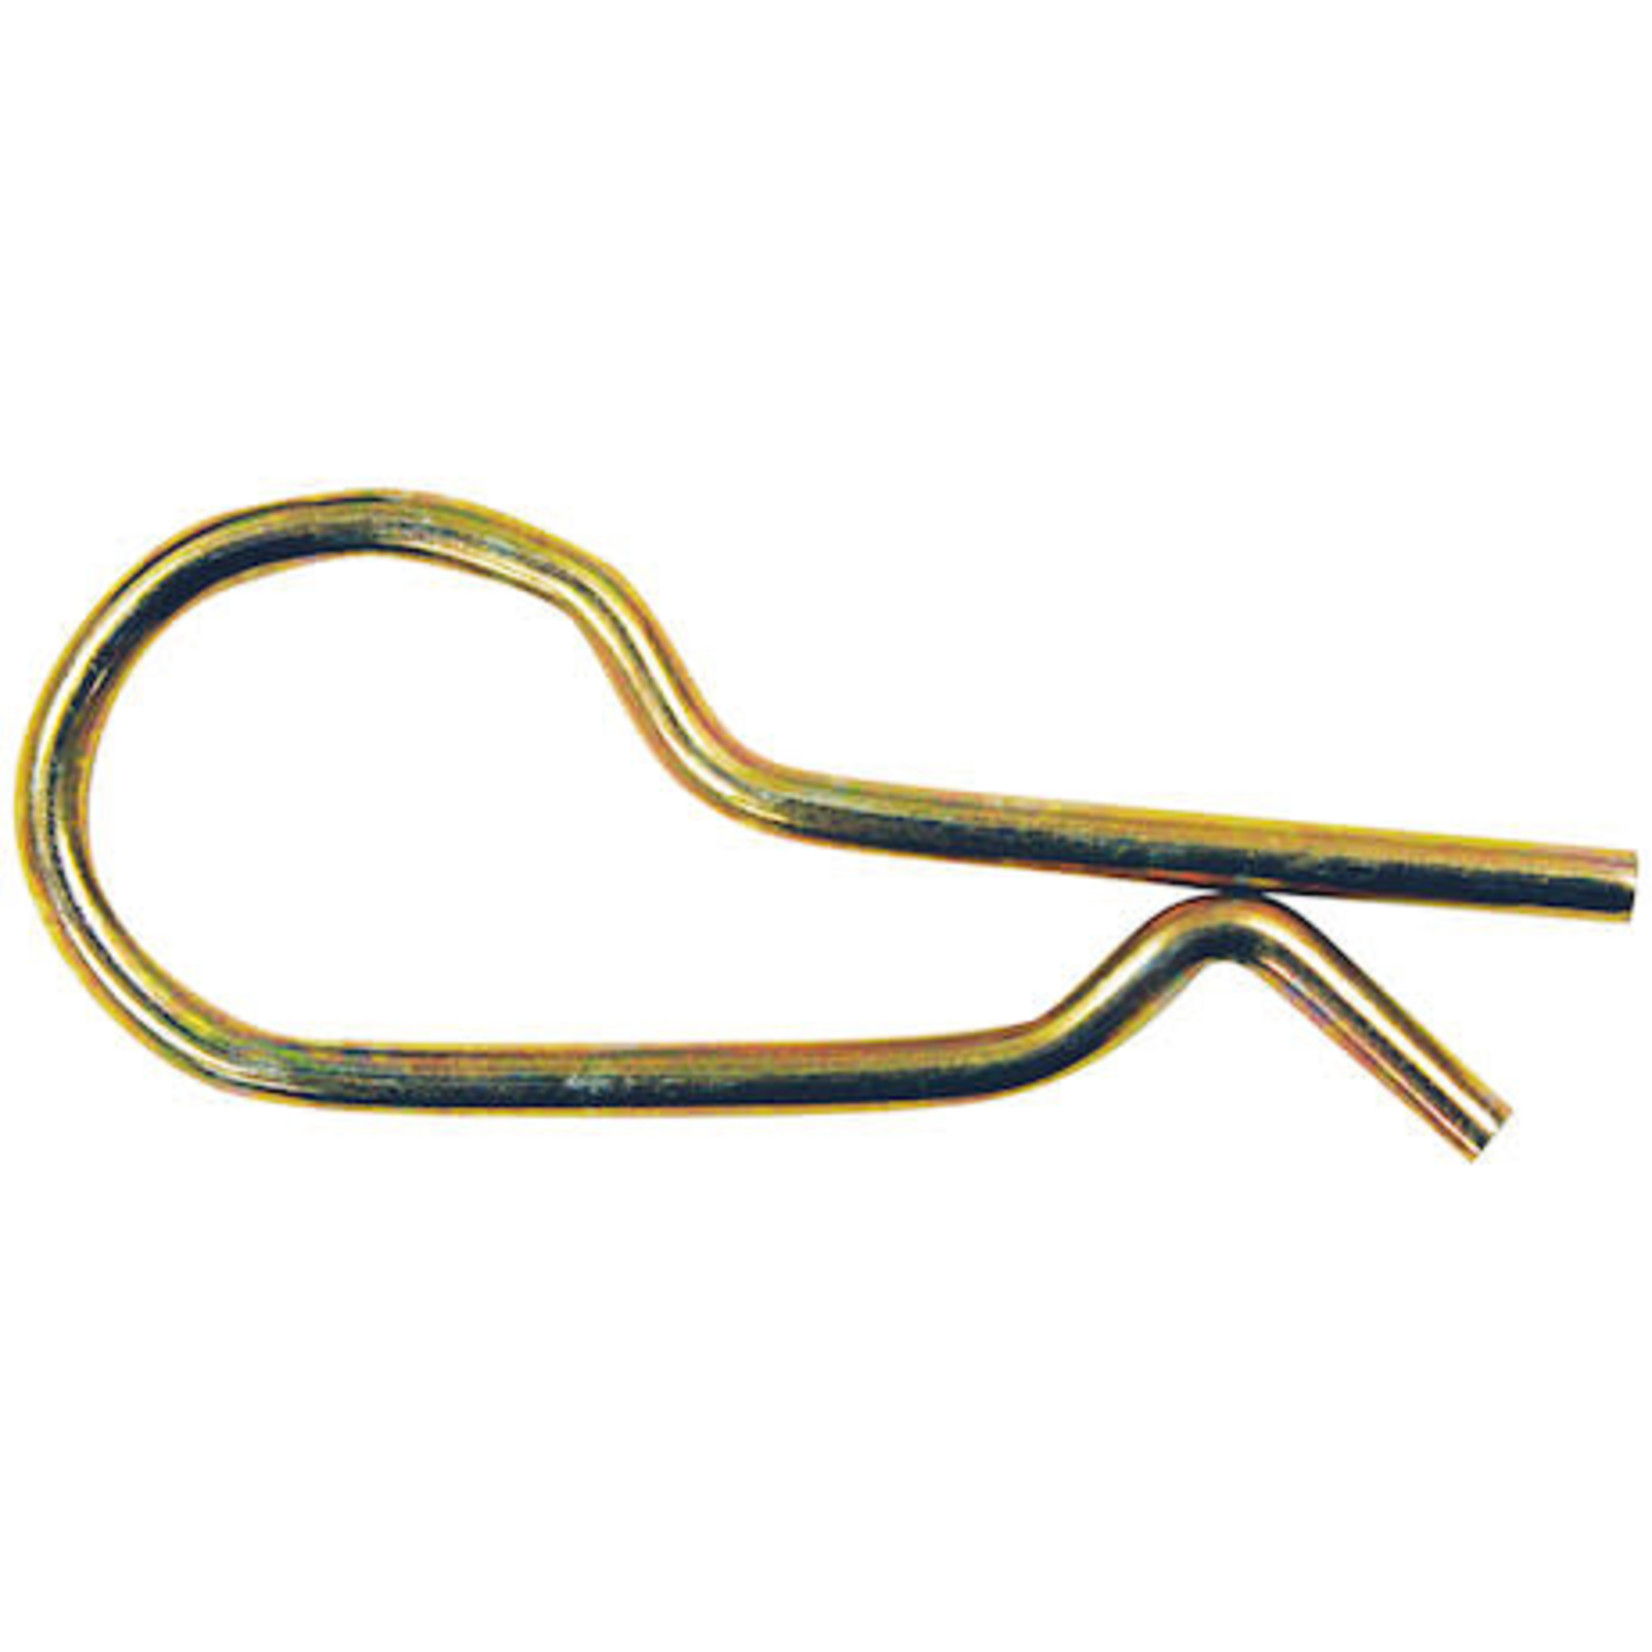 Buyers Products Company SAM Hairpin Cotter Pin 5/32 x 3-3/4 Inch-Replaces Western #91965K